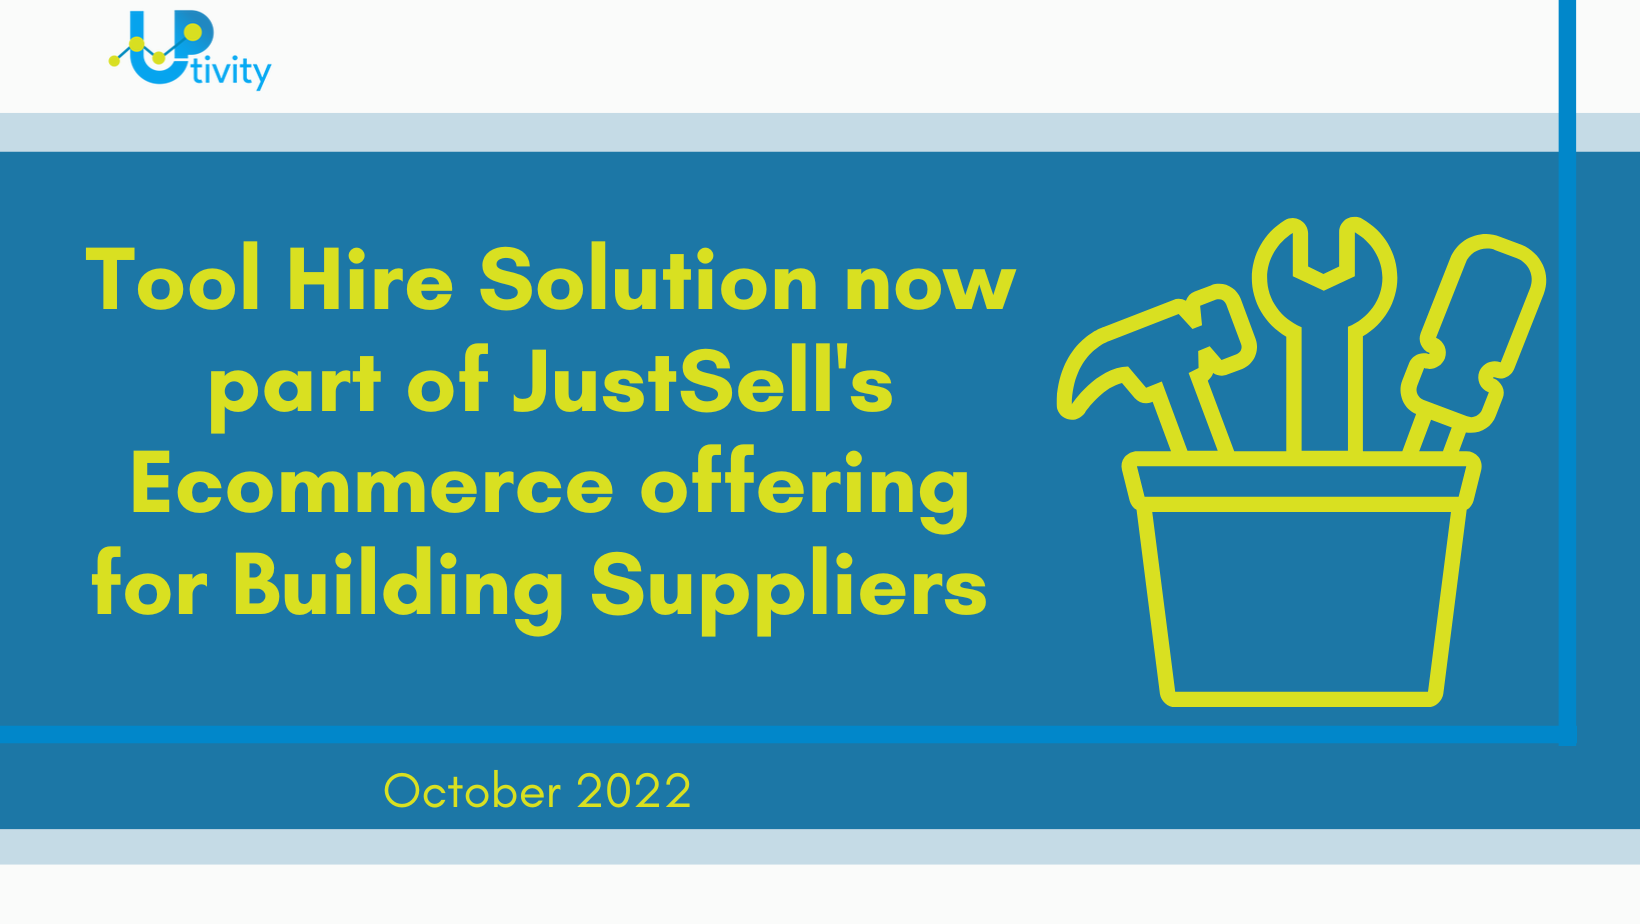 Tool Hire Solution now part of JustSell's Ecommerce offering for Building Suppliers